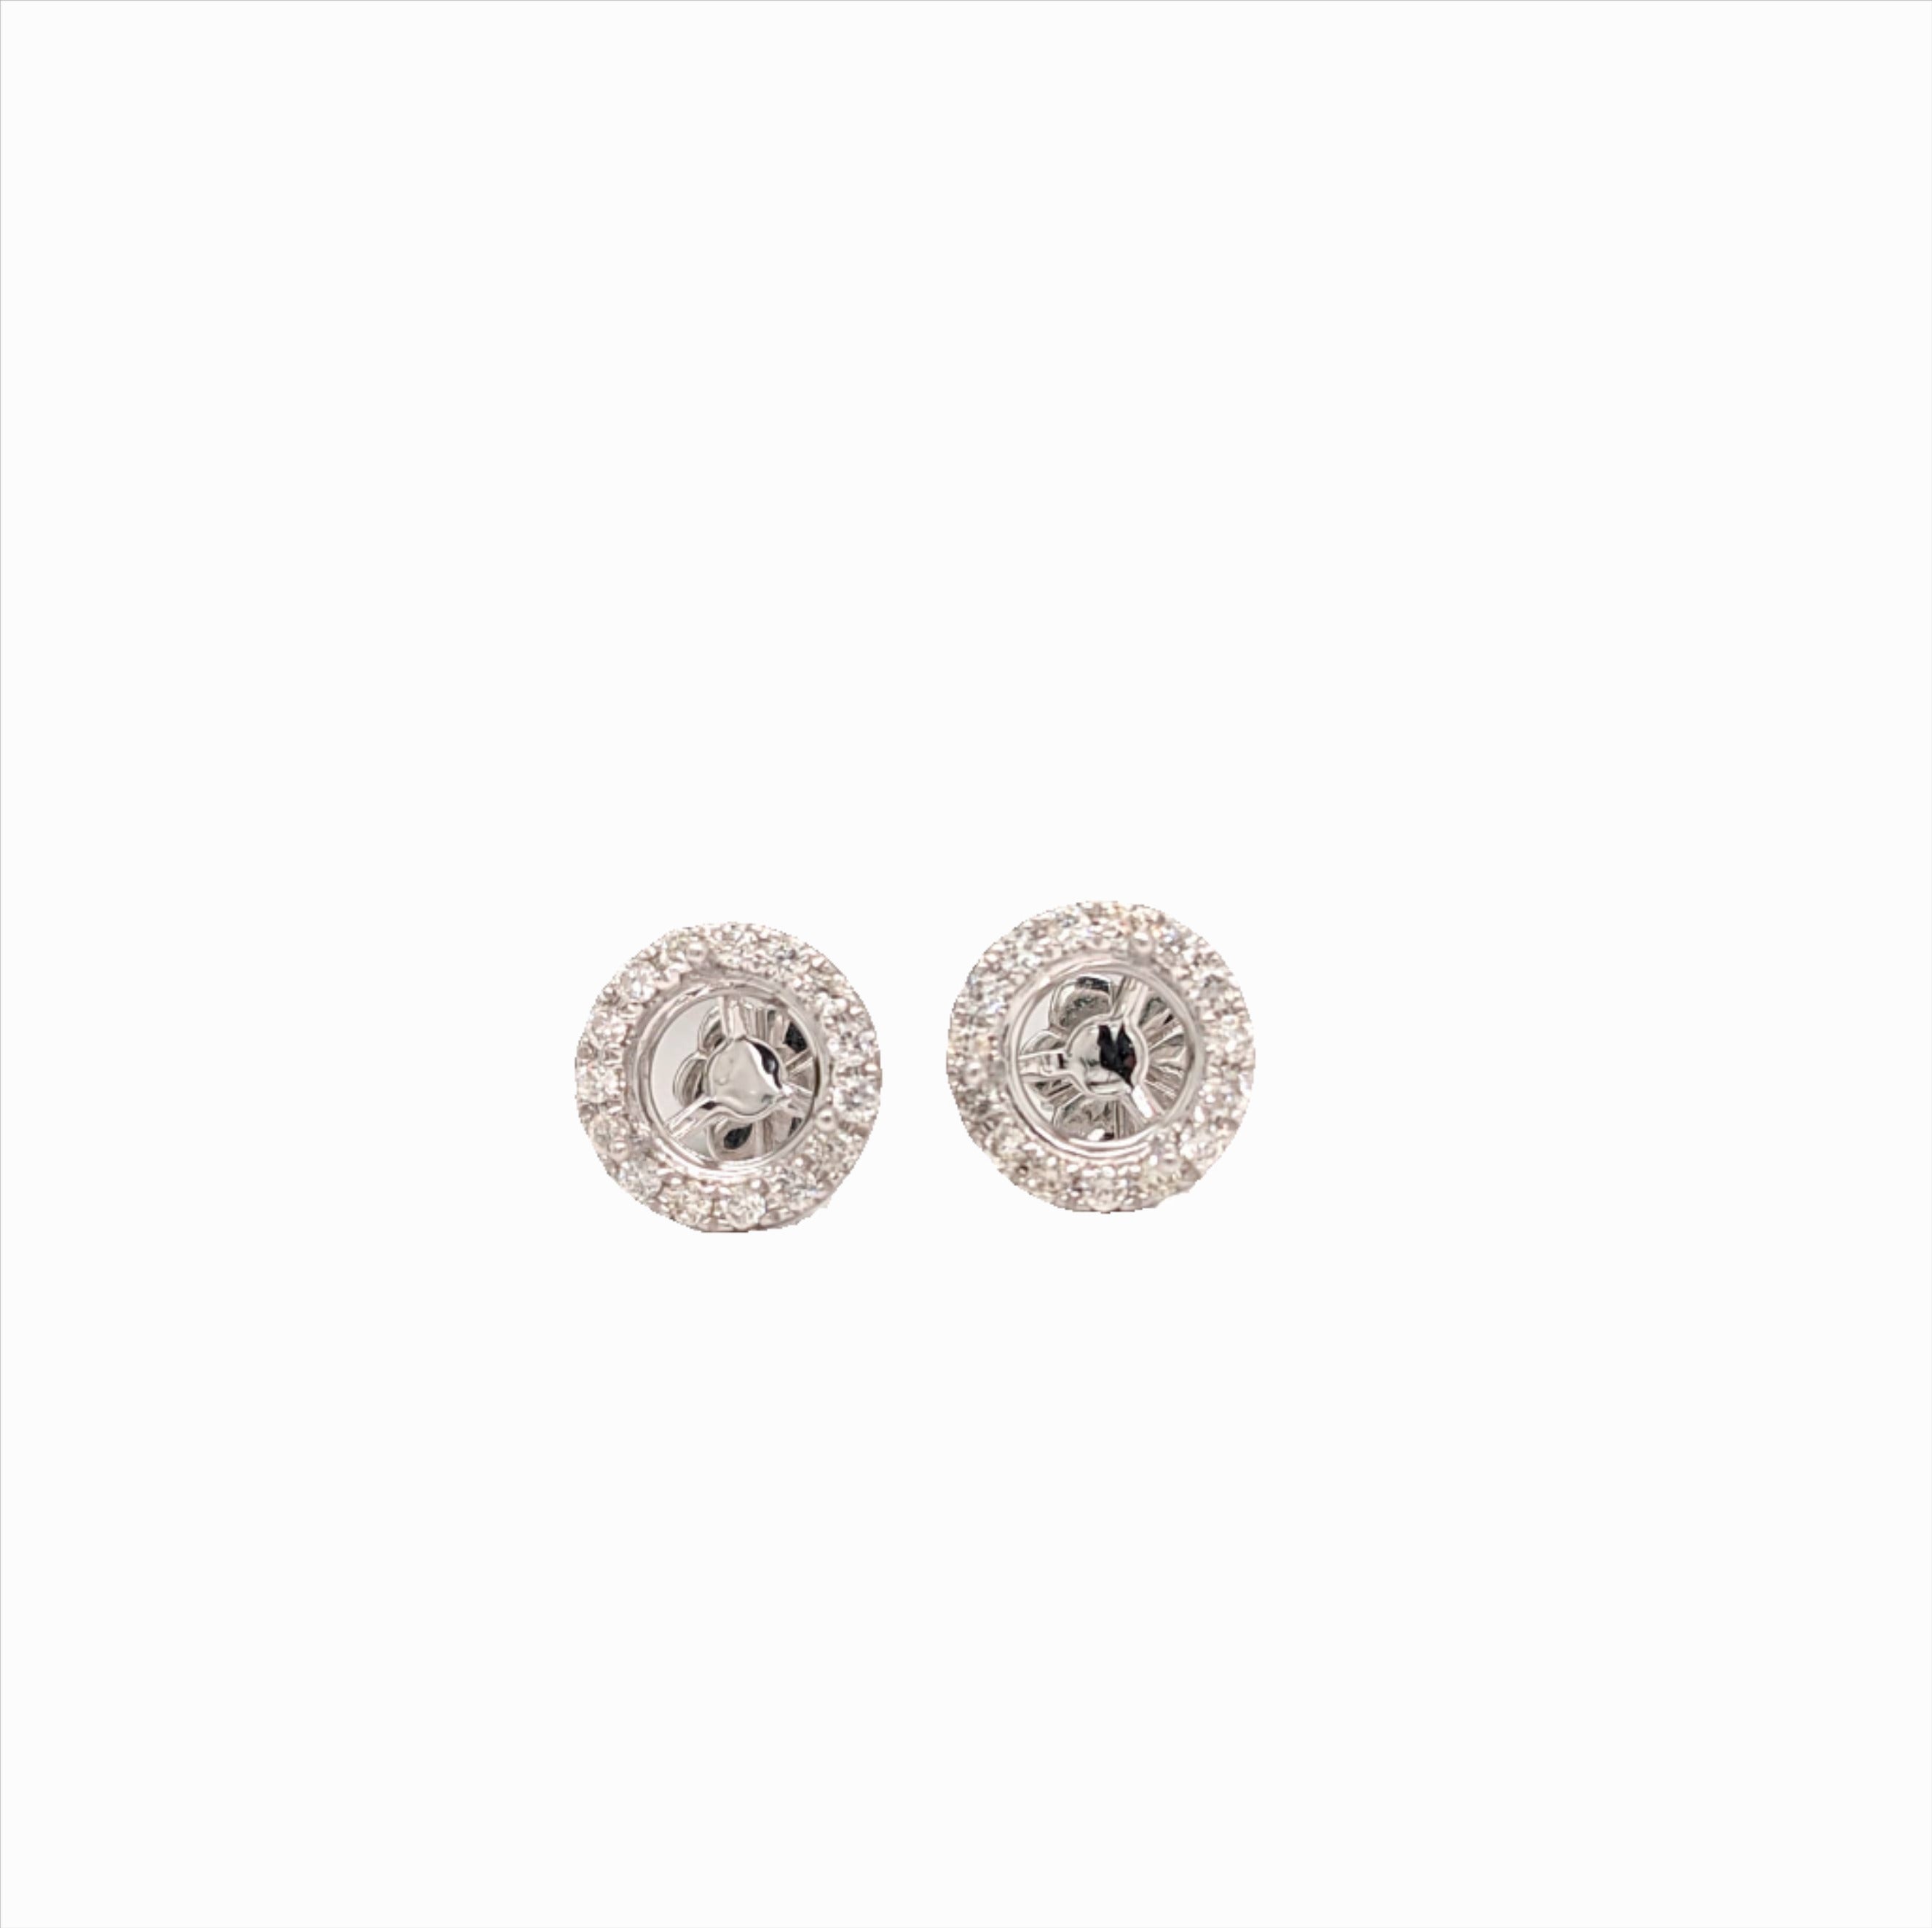 Stud Earrings-Diamond Halo Earring Semi Mount in Solid 14K Gold | Brilliant Cut 4mm 5mm 6mm | Martini | Gemstone Setting | Matched Pair | Customizable - NNJGemstones